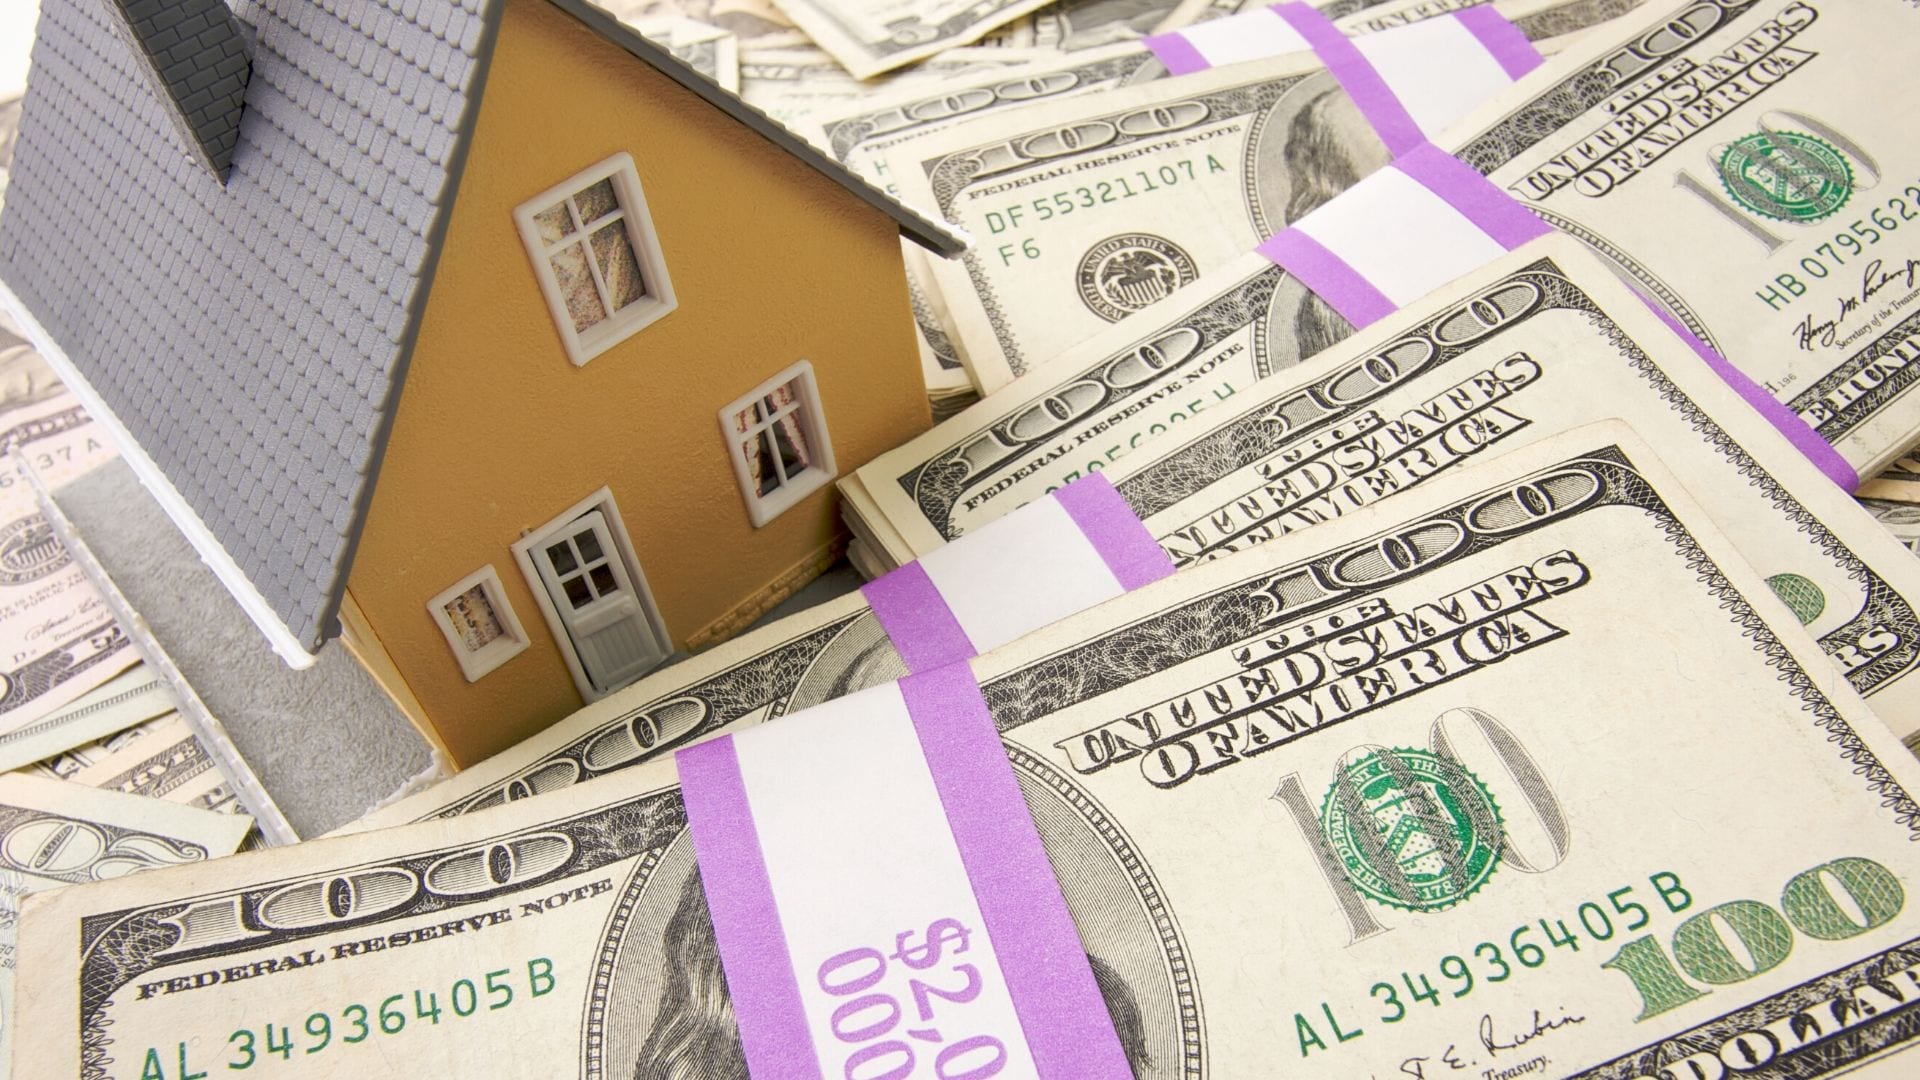 The Real Estate Cash Offer Explained For Home Sellers And iBuyers DealHouse